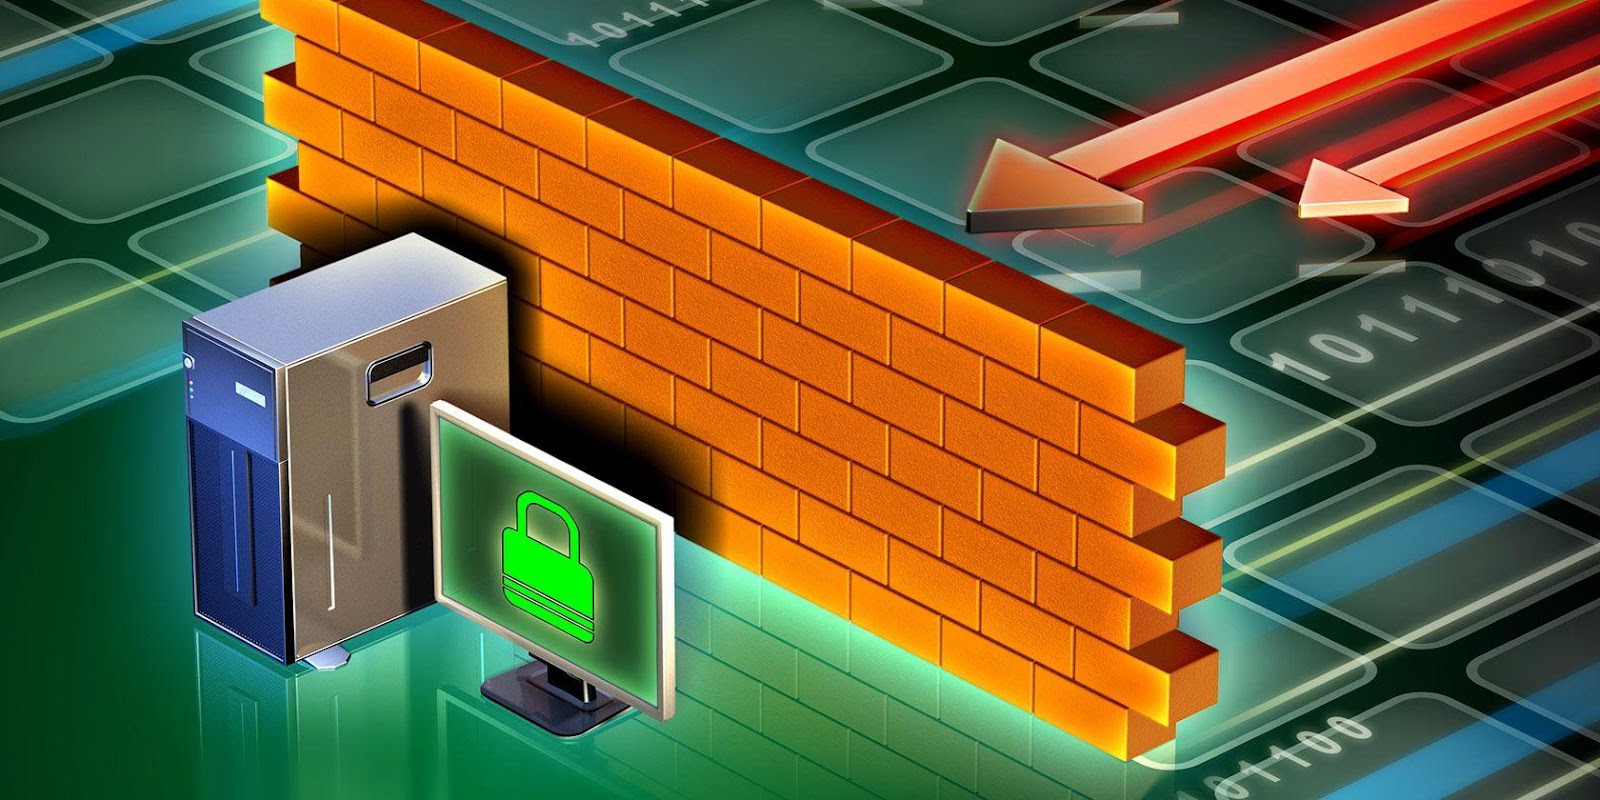 5 Reasons Why You Should Use a Firewall